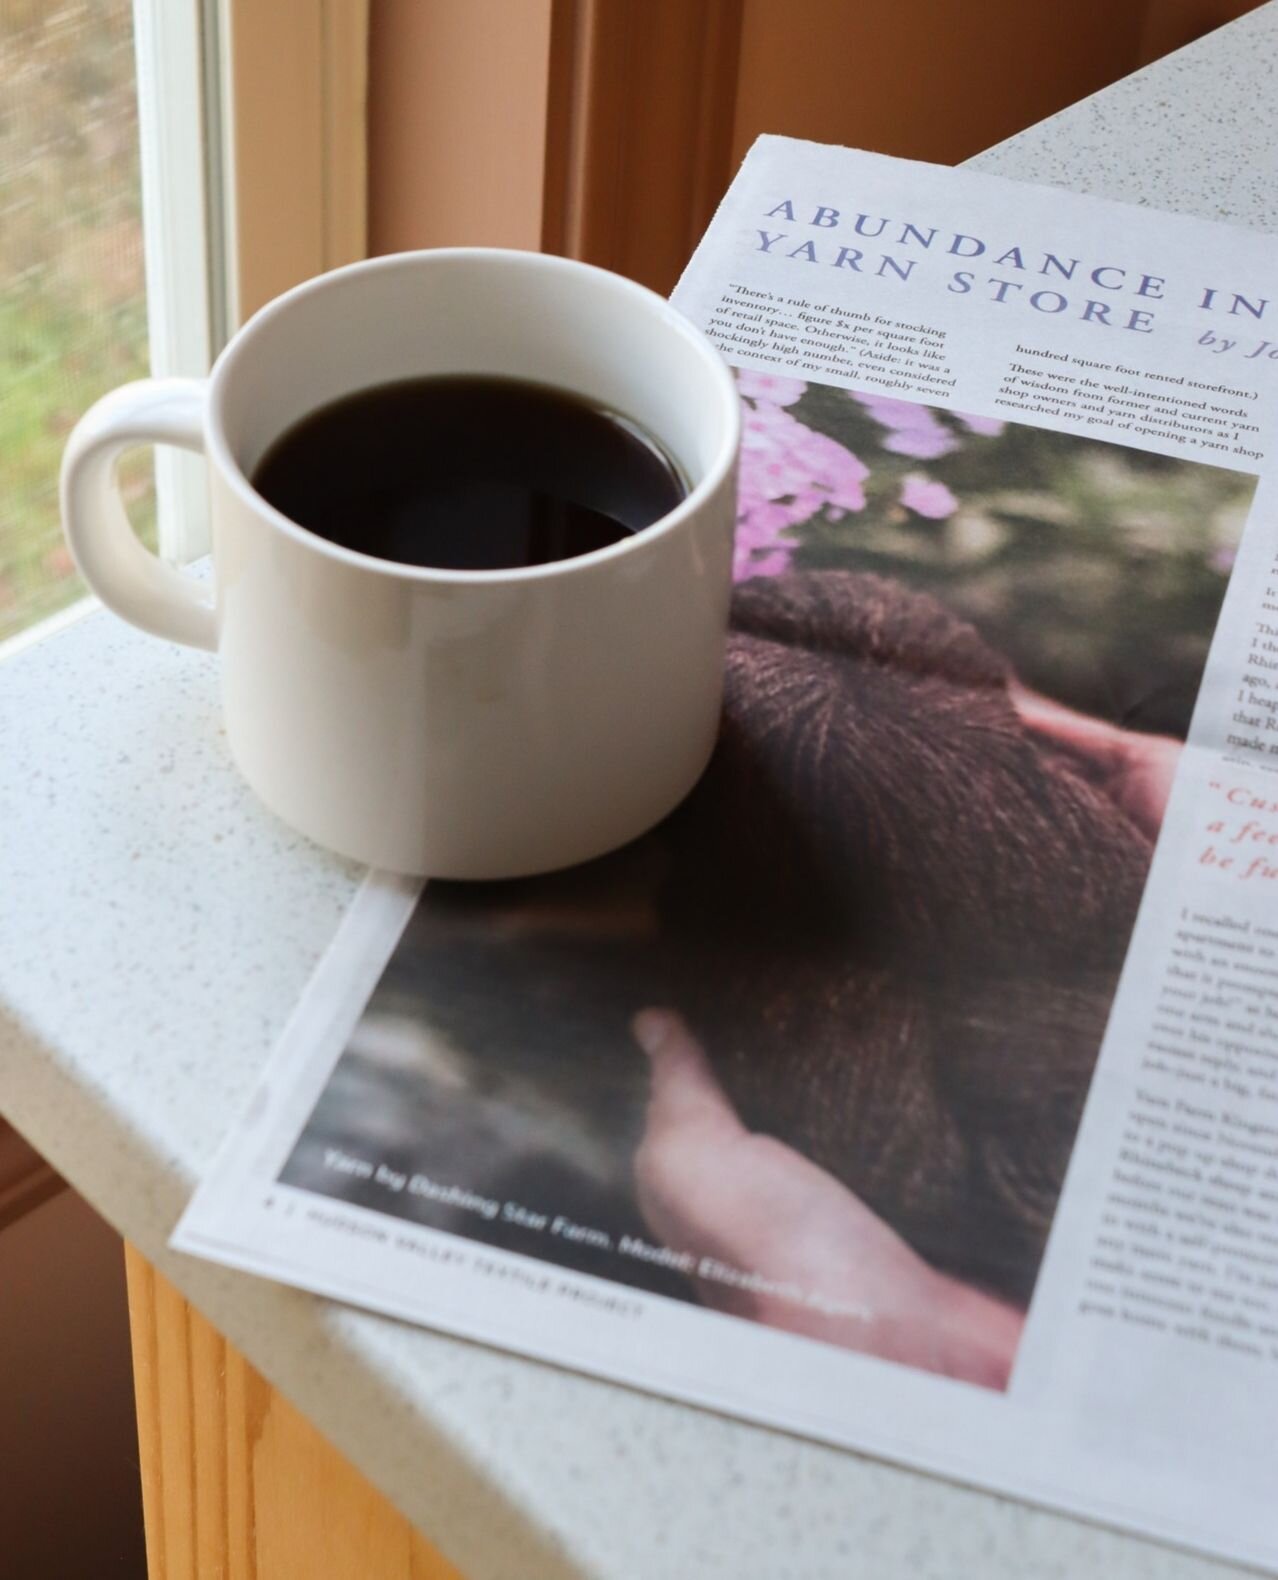 The calmest way to start your mornings this time of year: coffee and Common Threads! Readers, what is your favorite aspect of this publication so far?